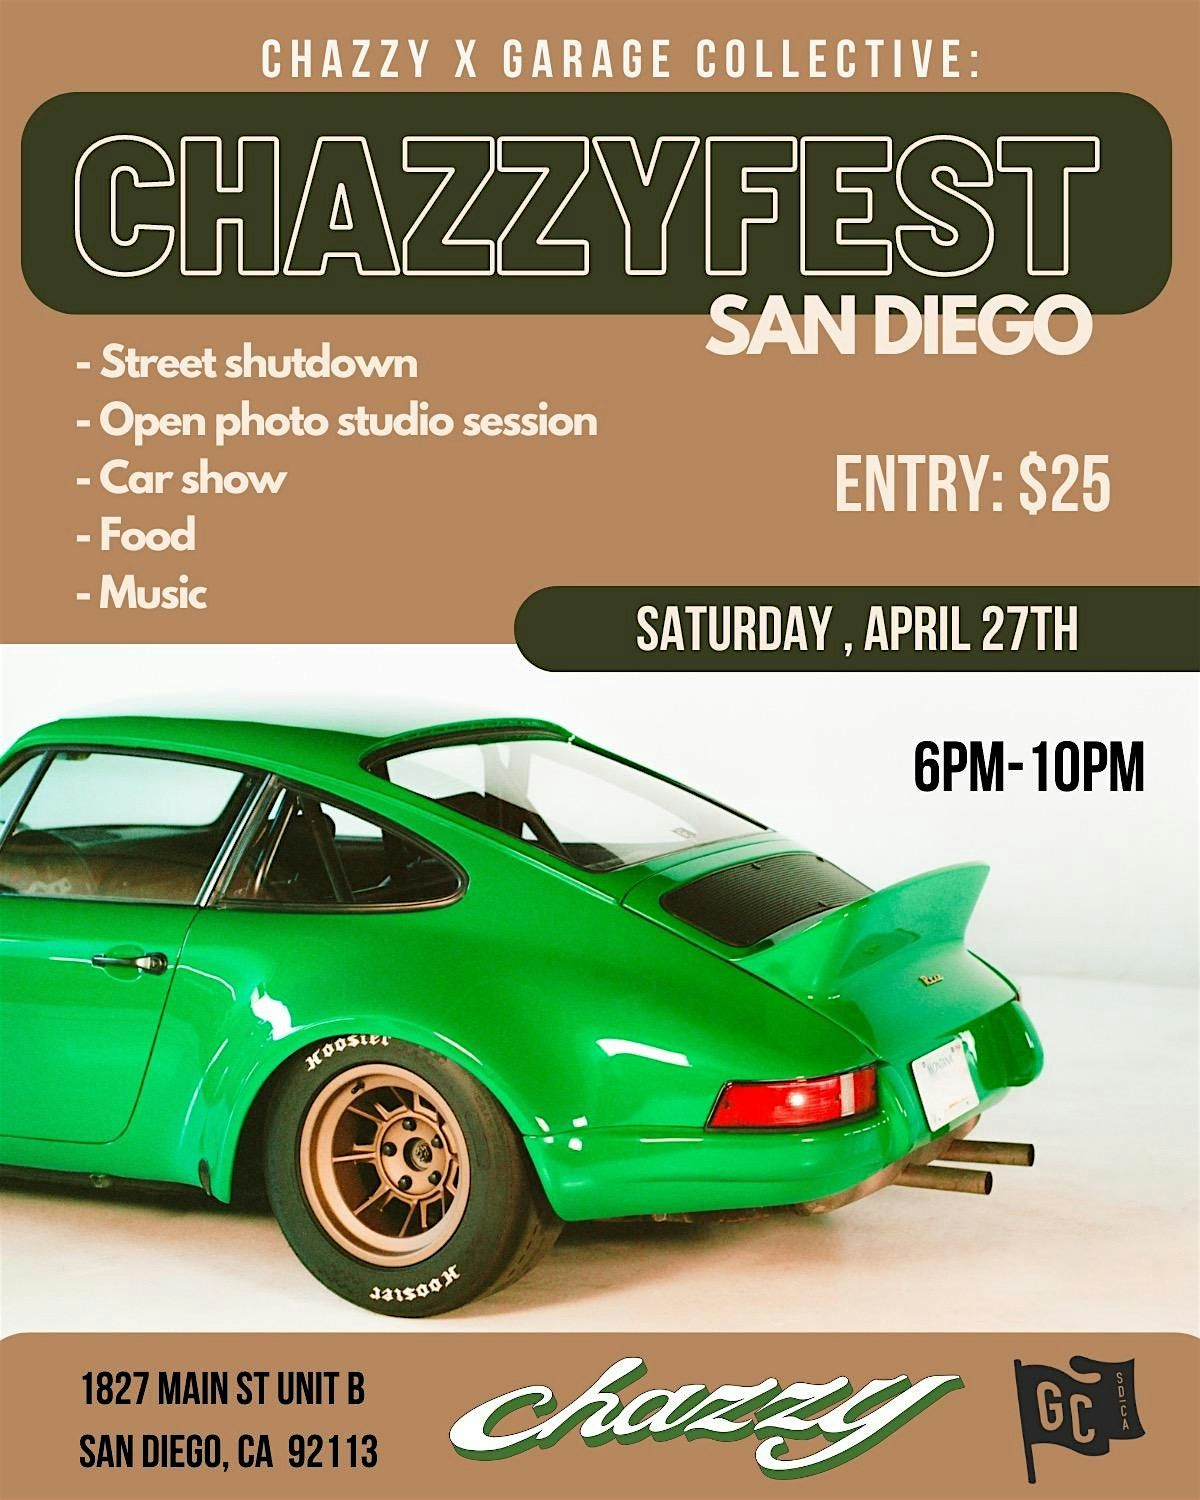 Chazzy x Garage Collective (Chazzyfest)